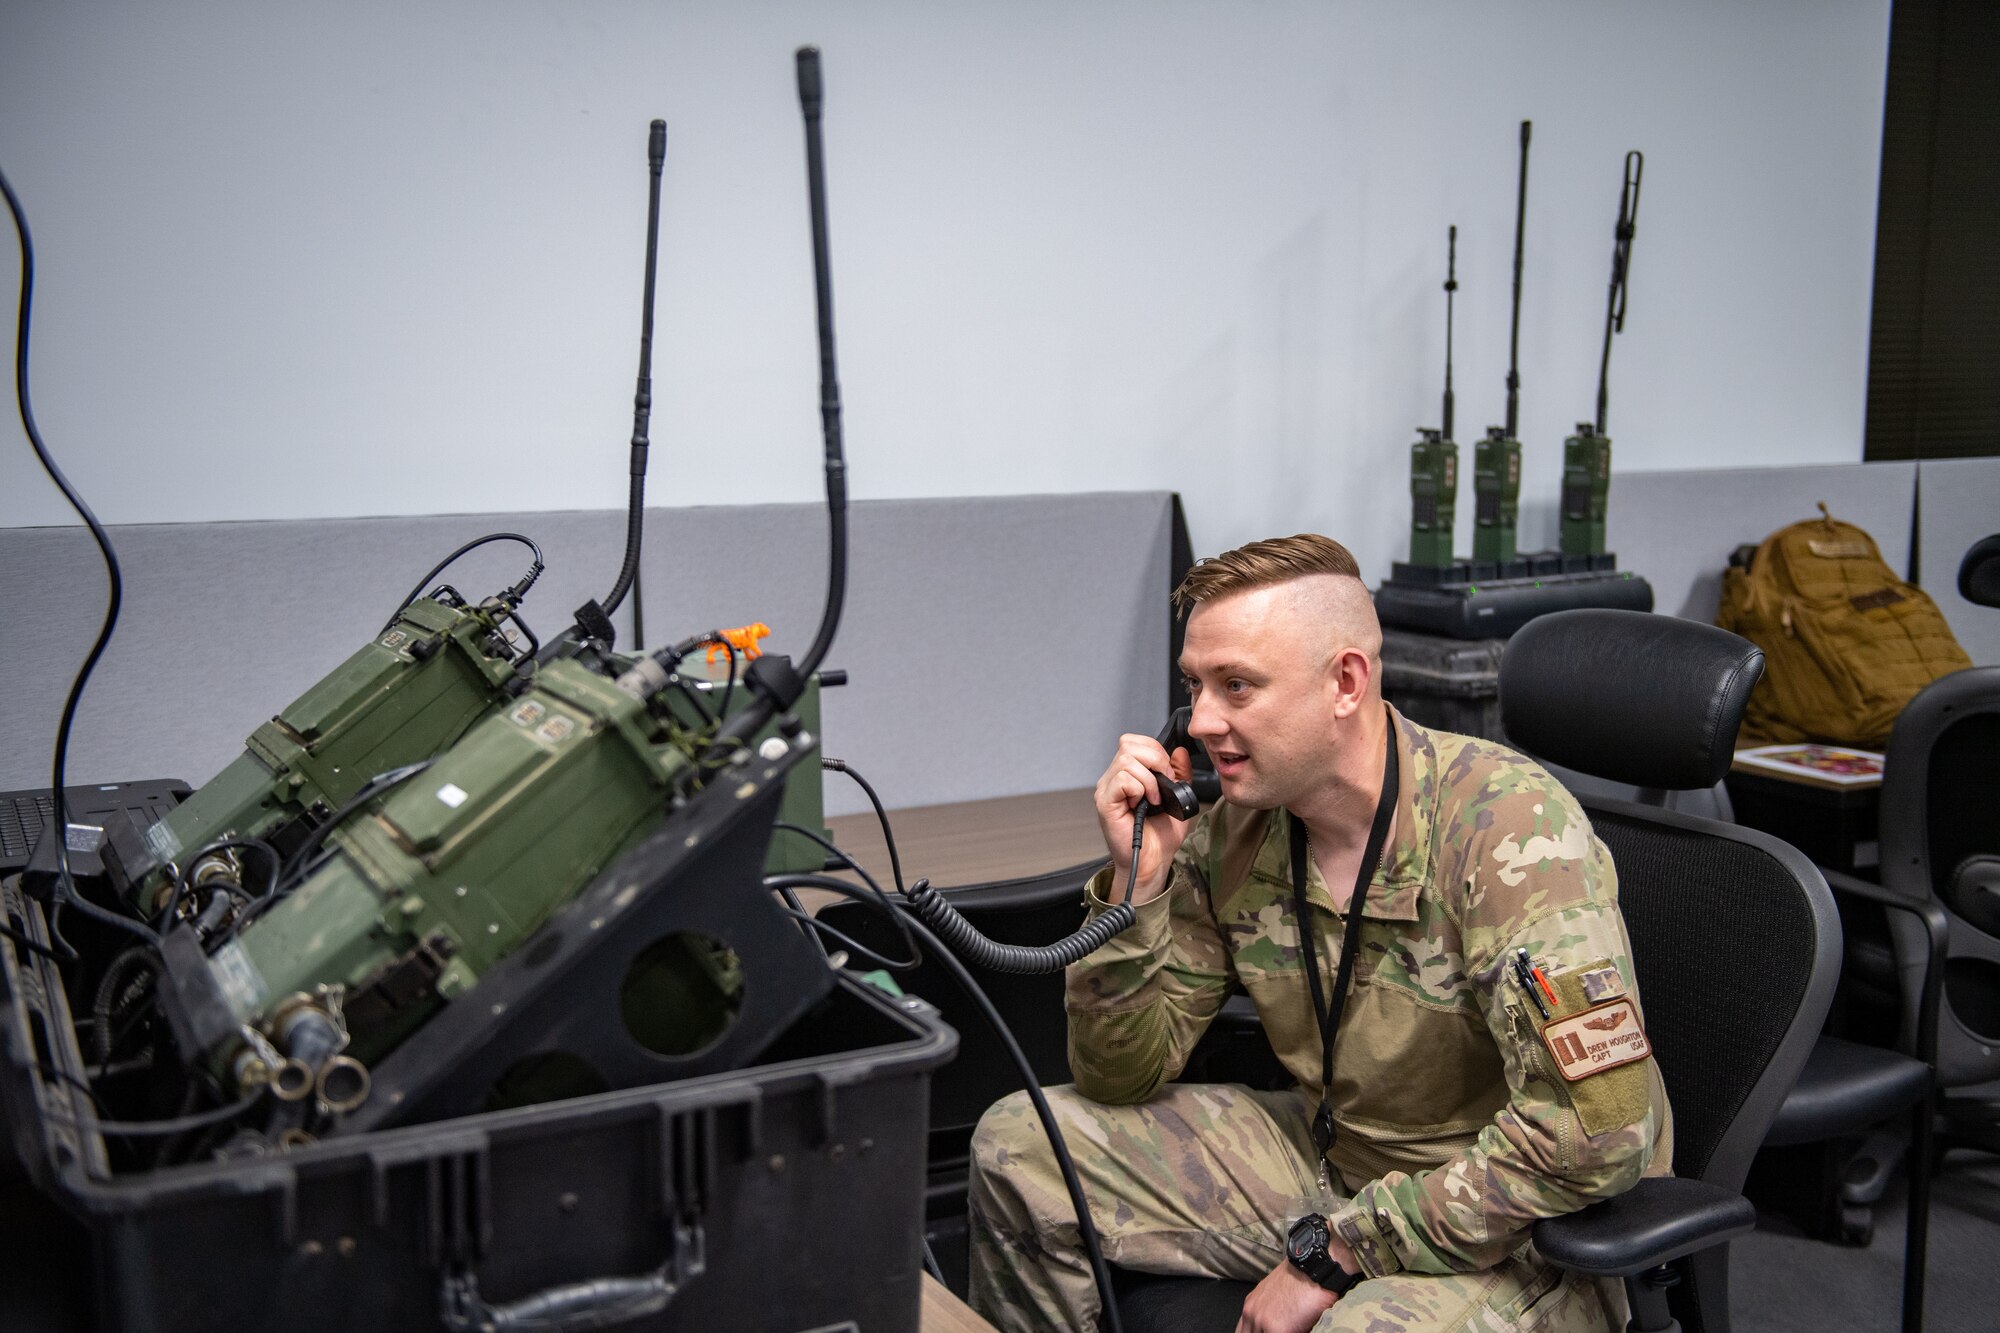 U.S. Air Force Capt. Drew Houghton, 71st Rescue Squadron combat systems officer, relays information from the forward operating site during Exercise Ready Tiger 24-1 at Savannah Air National Guard Base, Georgia, April 9, 2024. Built upon Air Combat Command's directive to assert air power in contested environments, Exercise Ready Tiger 24-1 aims to test and enhance the 23rd Wing’s proficiency in executing Lead Wing and Expeditionary Air Base concepts through Agile Combat Employment and command and control operations. (U.S. Air Force photo by Senior Airman Courtney Sebastianelli)